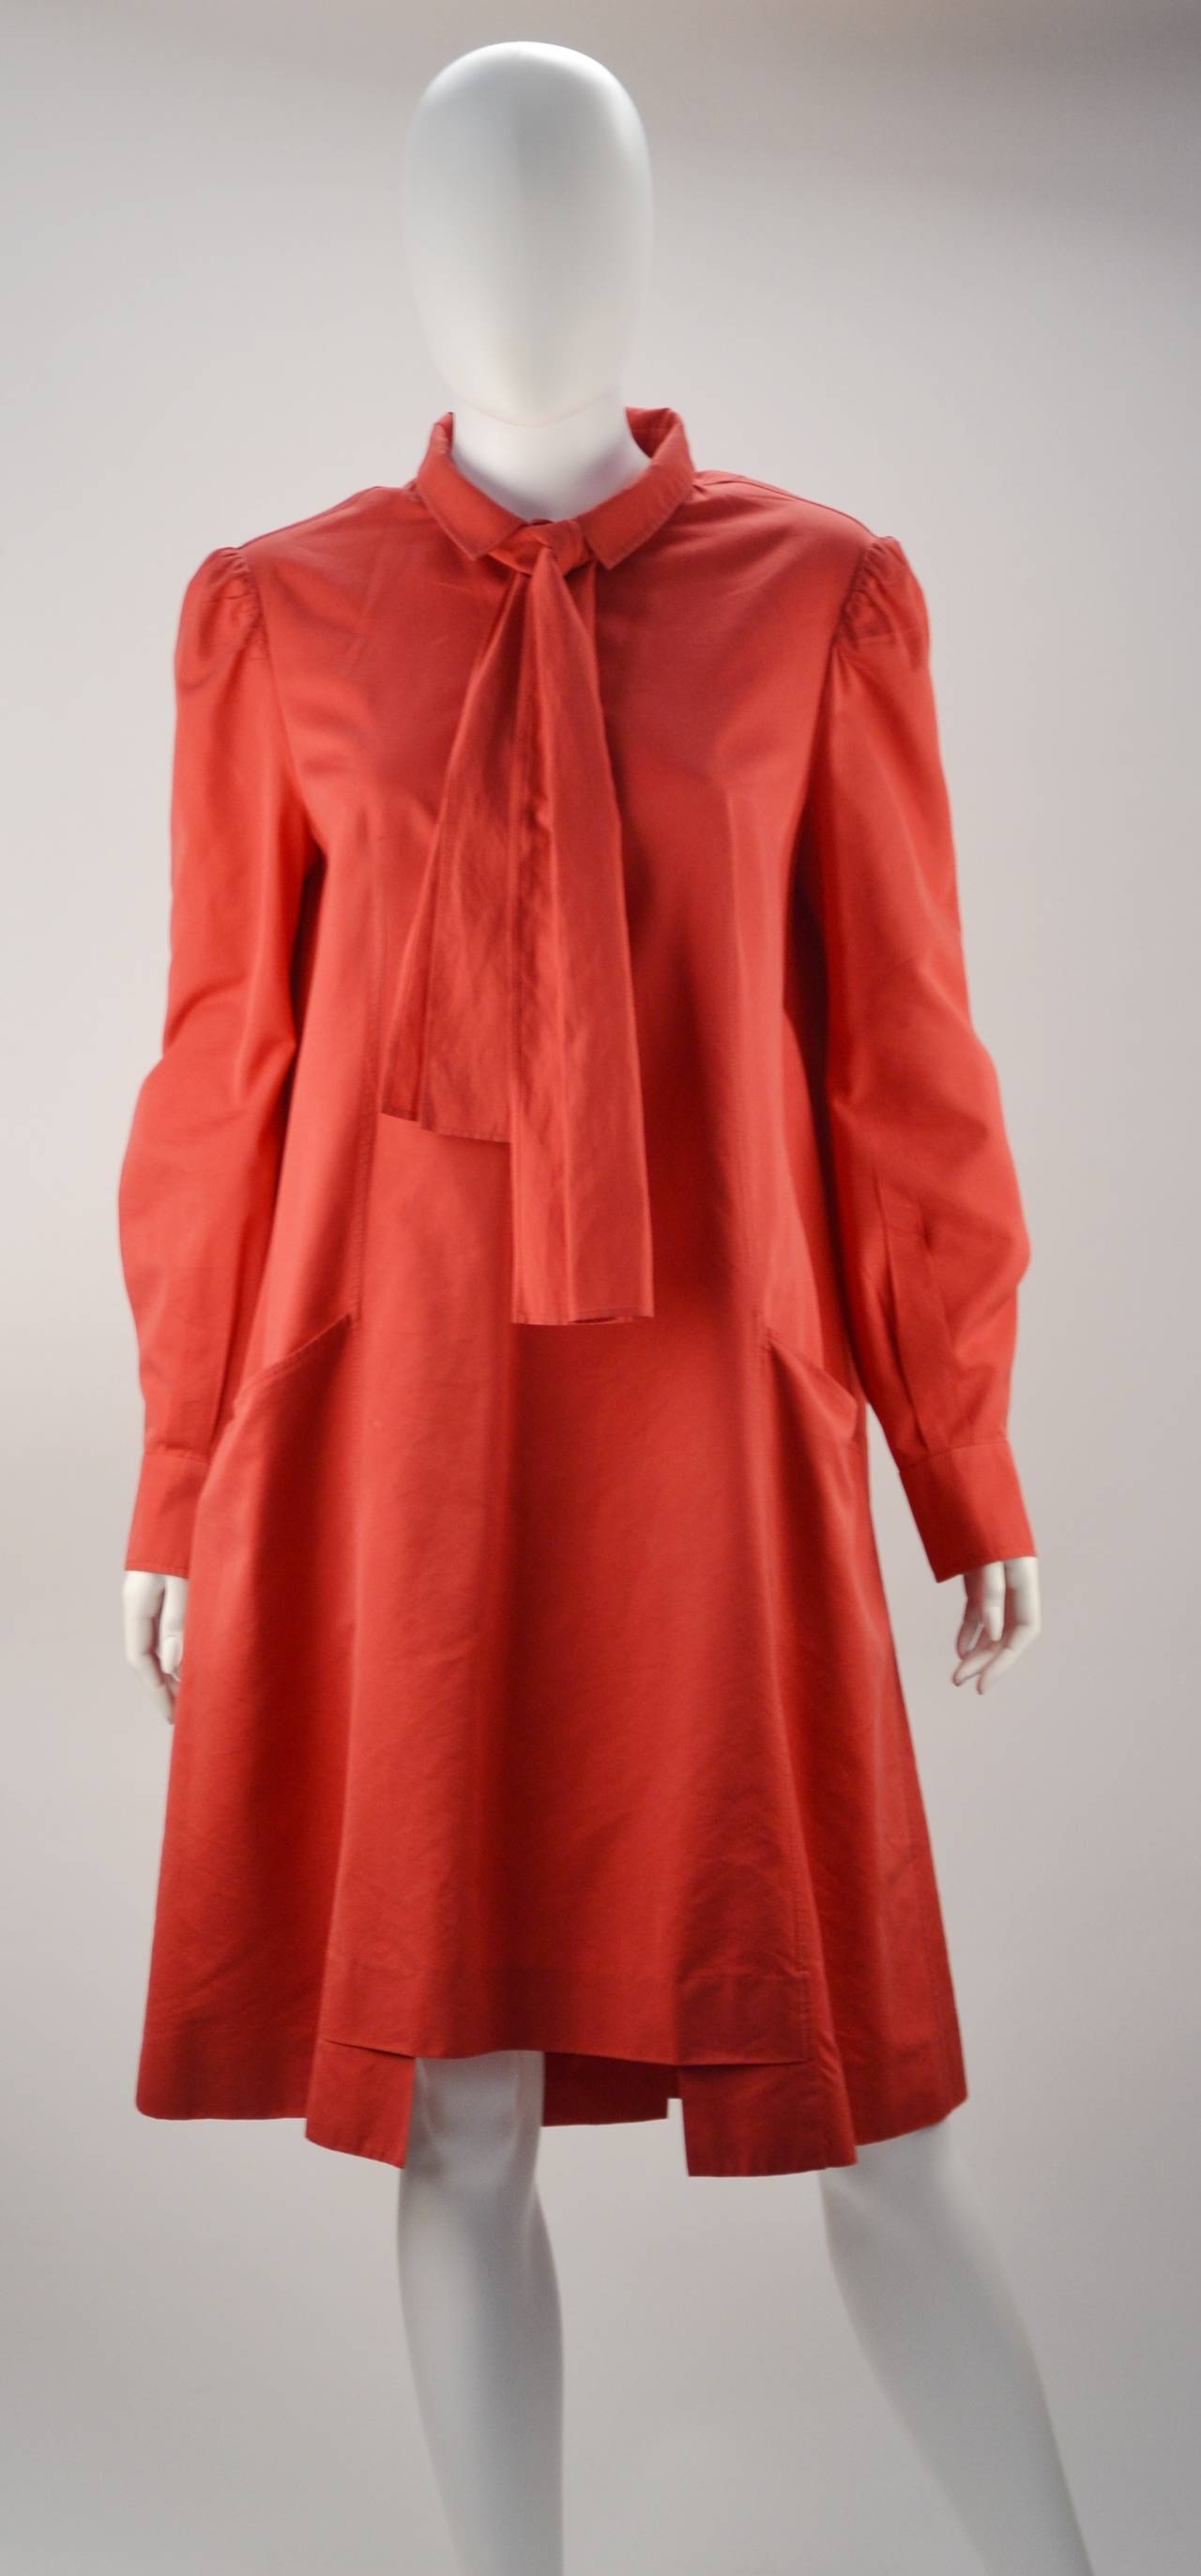 Light and airy red Yves Saint Laurent tent dress.  Can be worn any time of year. We have seen it belted or straight and flowing.  The bishop sleeves can be worn down or rolled up and the tie at neck can be worn many ways.  How about pinning on a